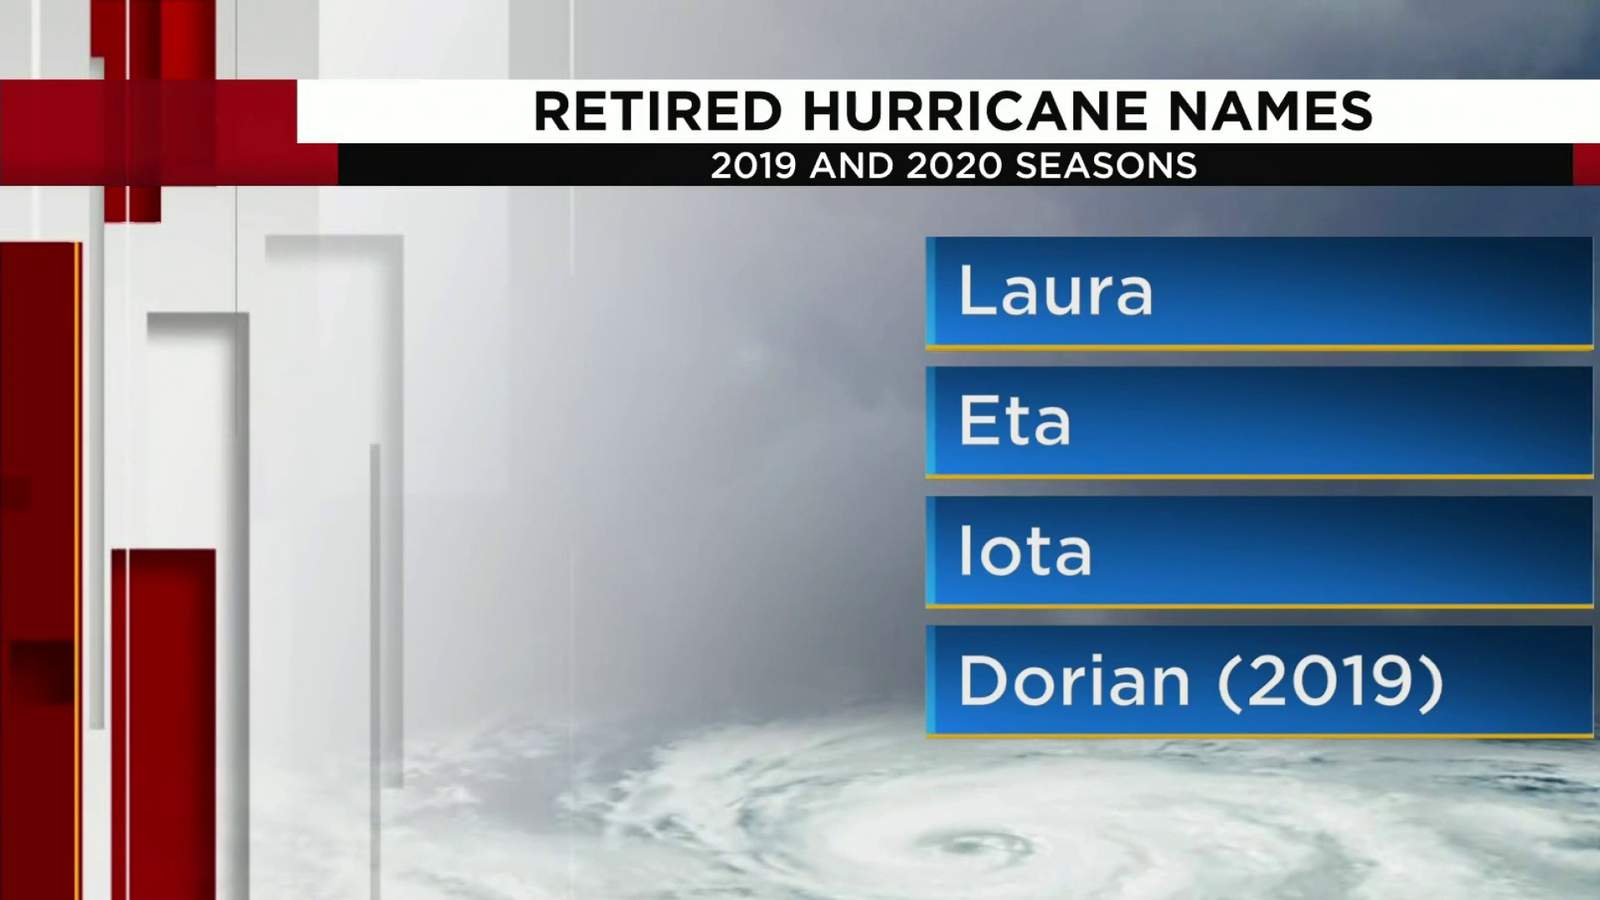 Here are the newly retired hurricane names for the 2020, 2019 seasons